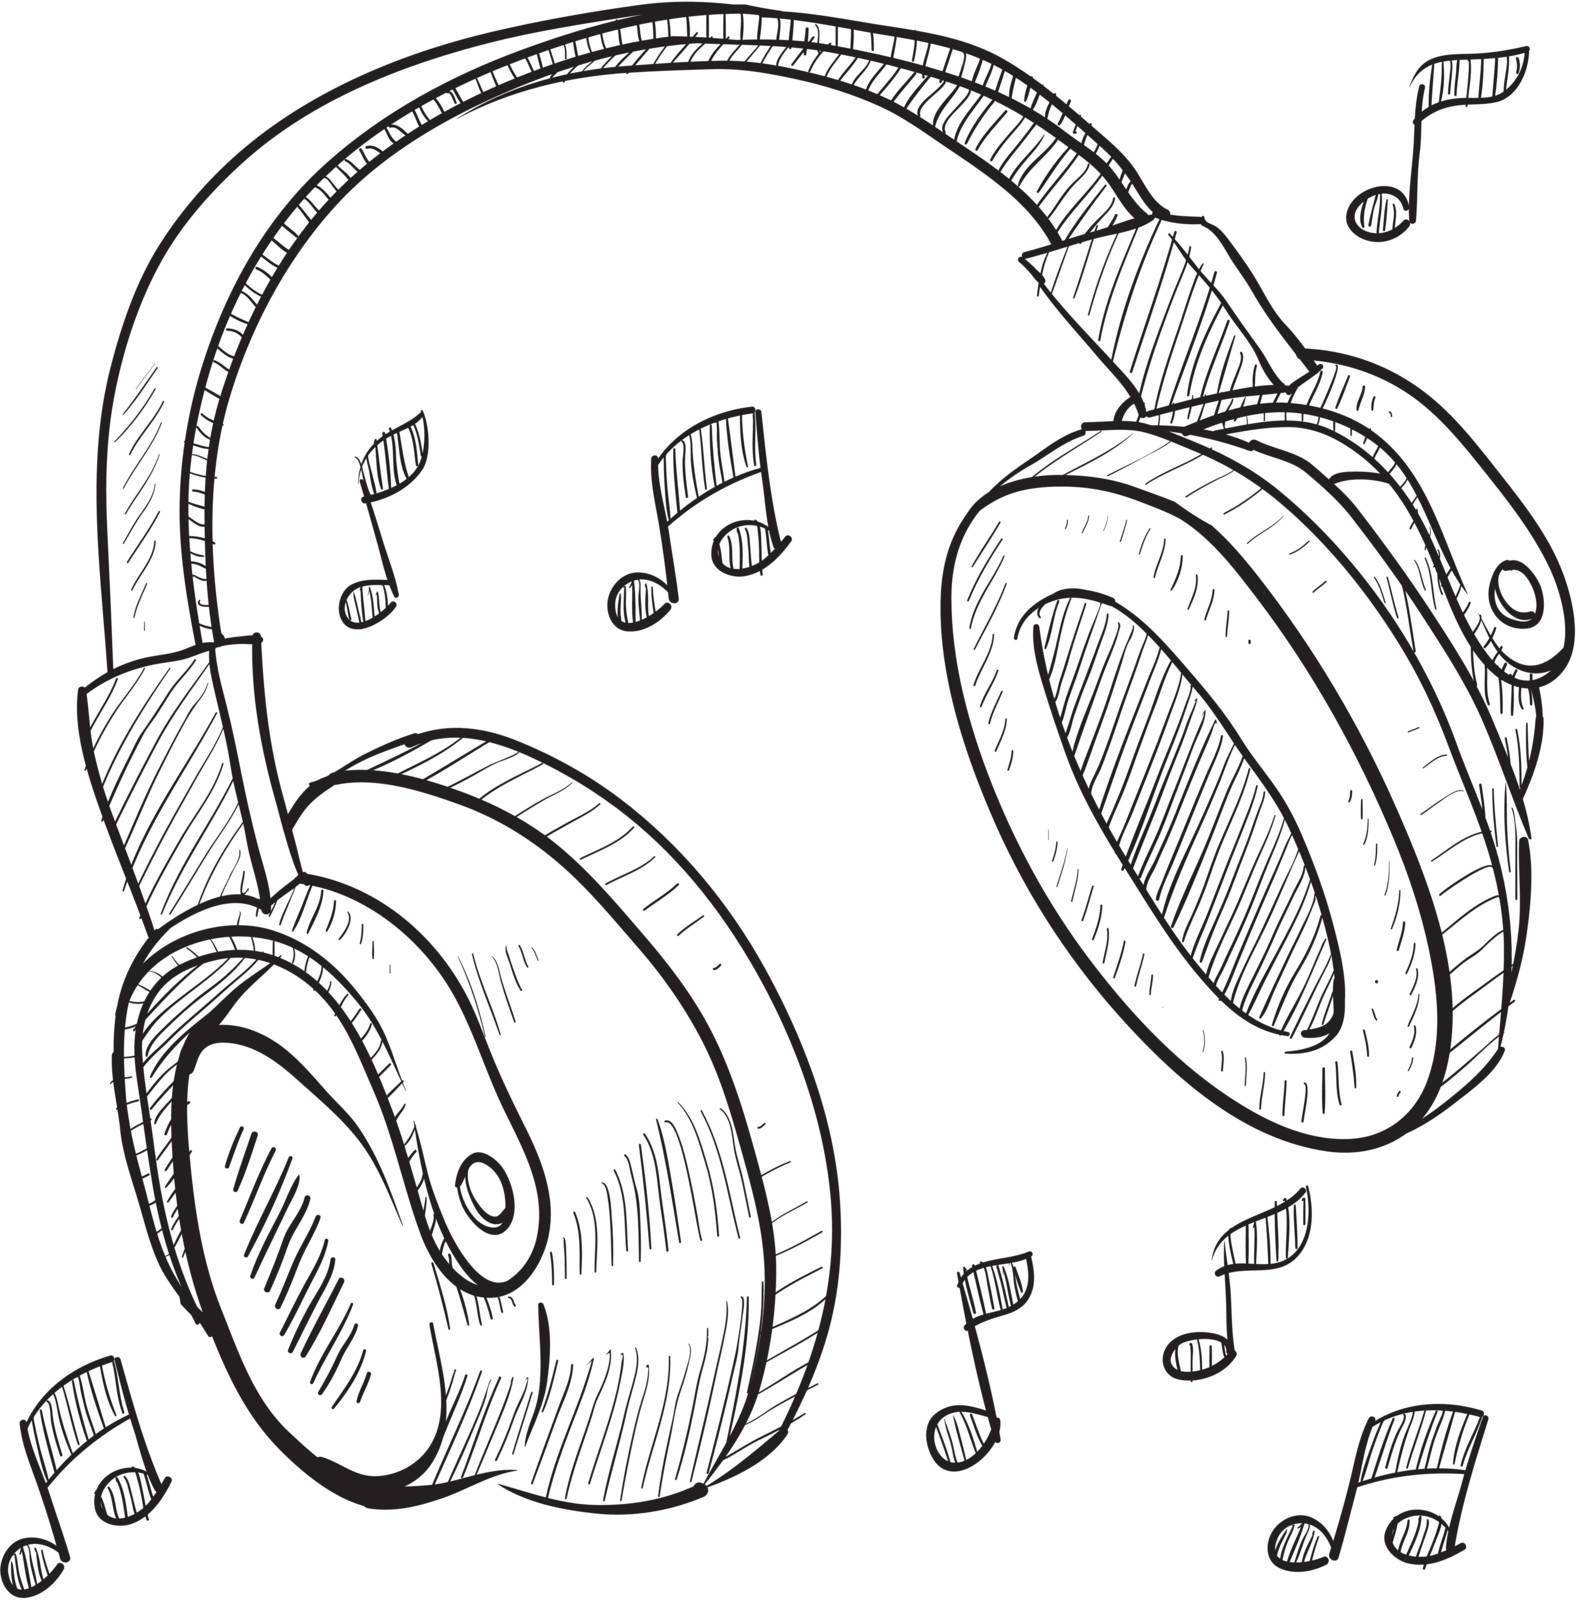 Doodle style headphones vector illustration with musical notes